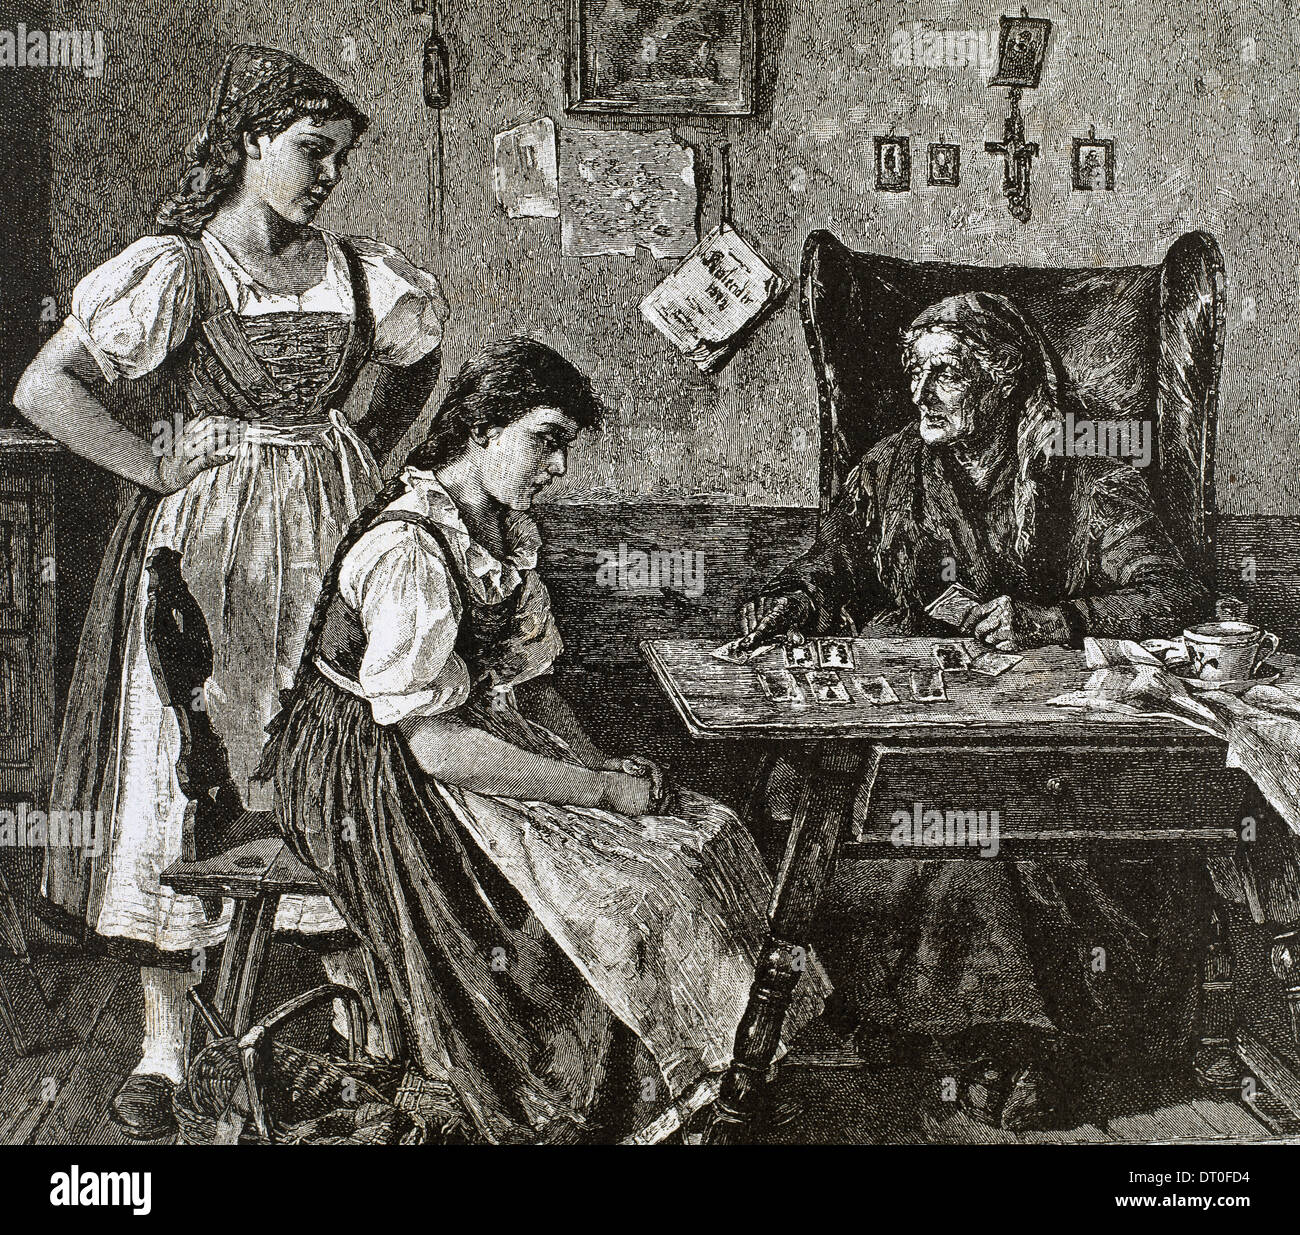 At fortune teller's house. Engraving by Walla. L'Illustration, 1885. Stock Photo